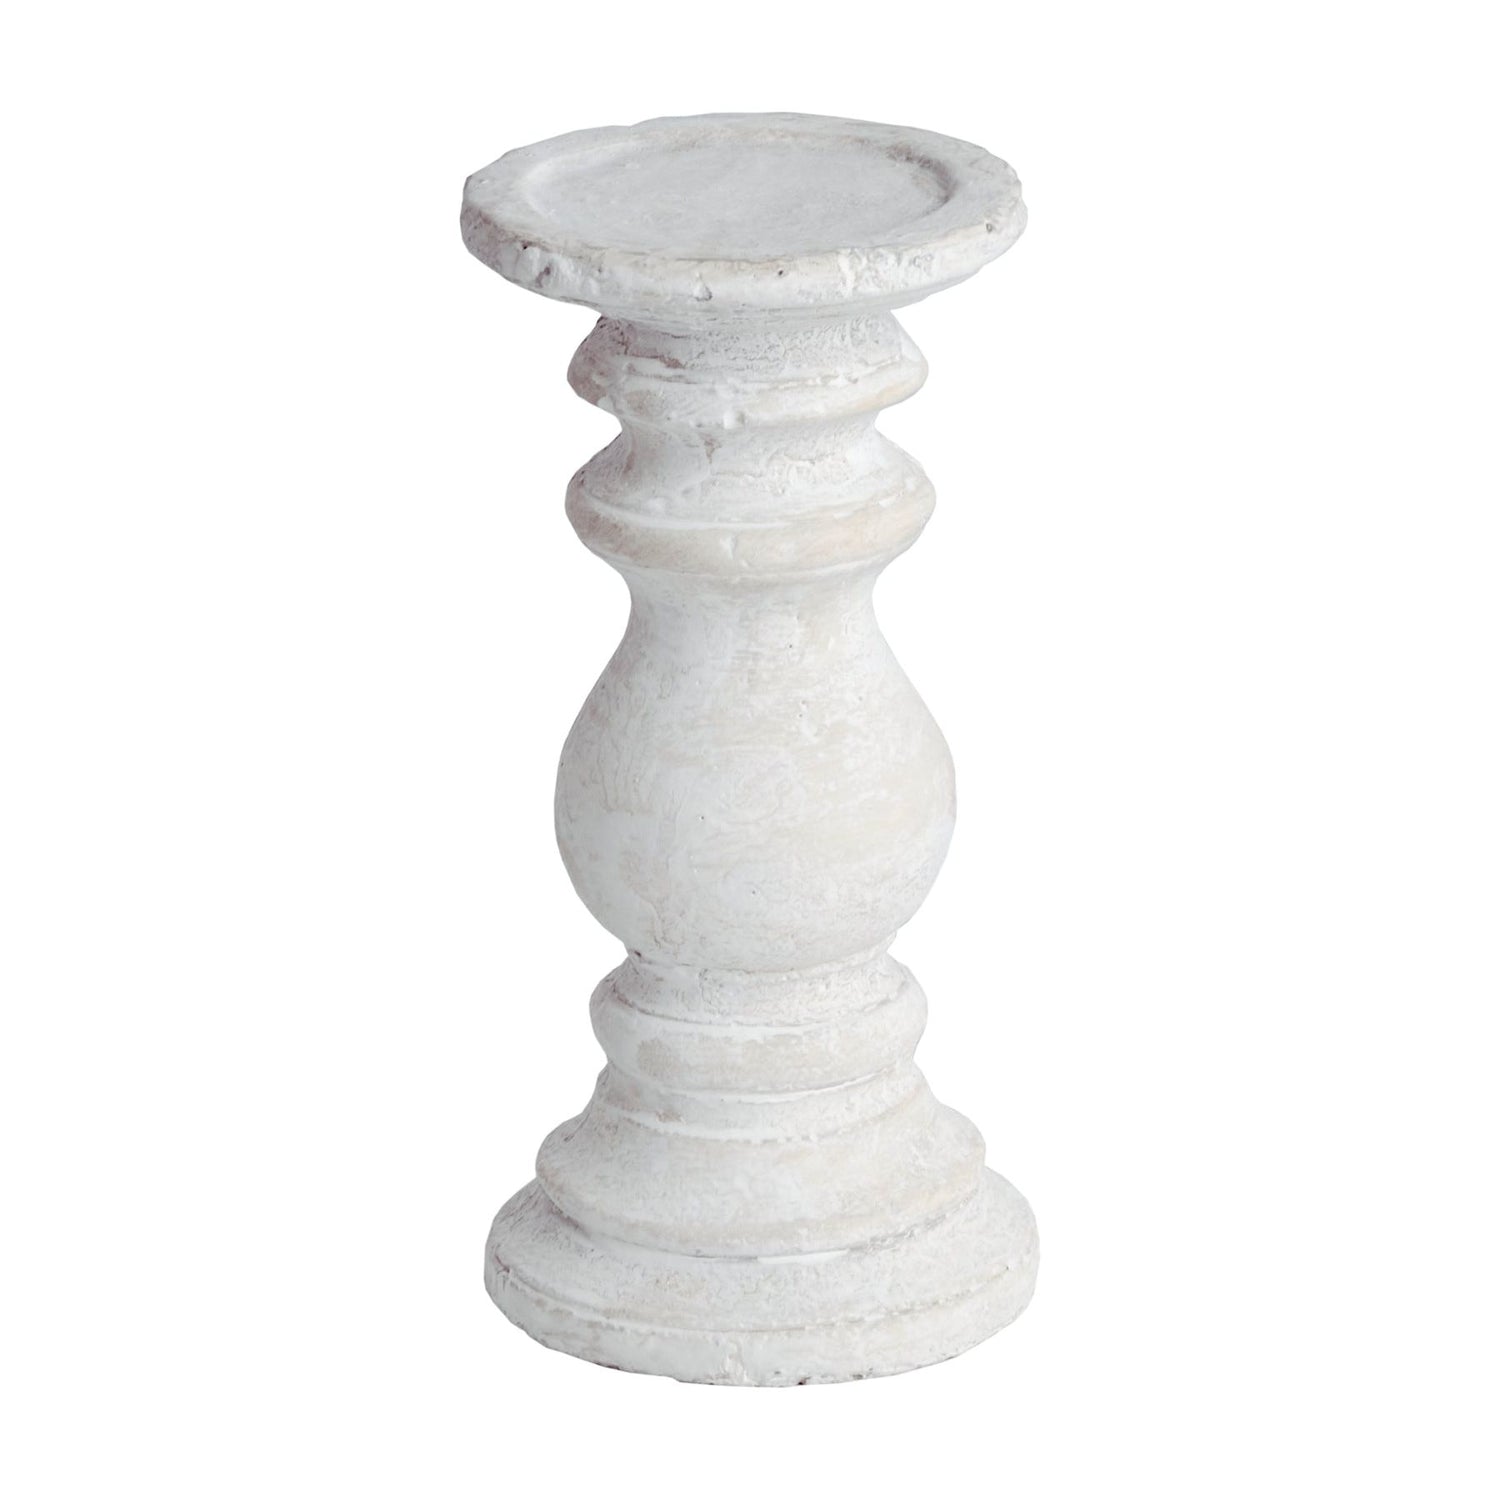 Small Stone Candle Holder - Ashton and Finch